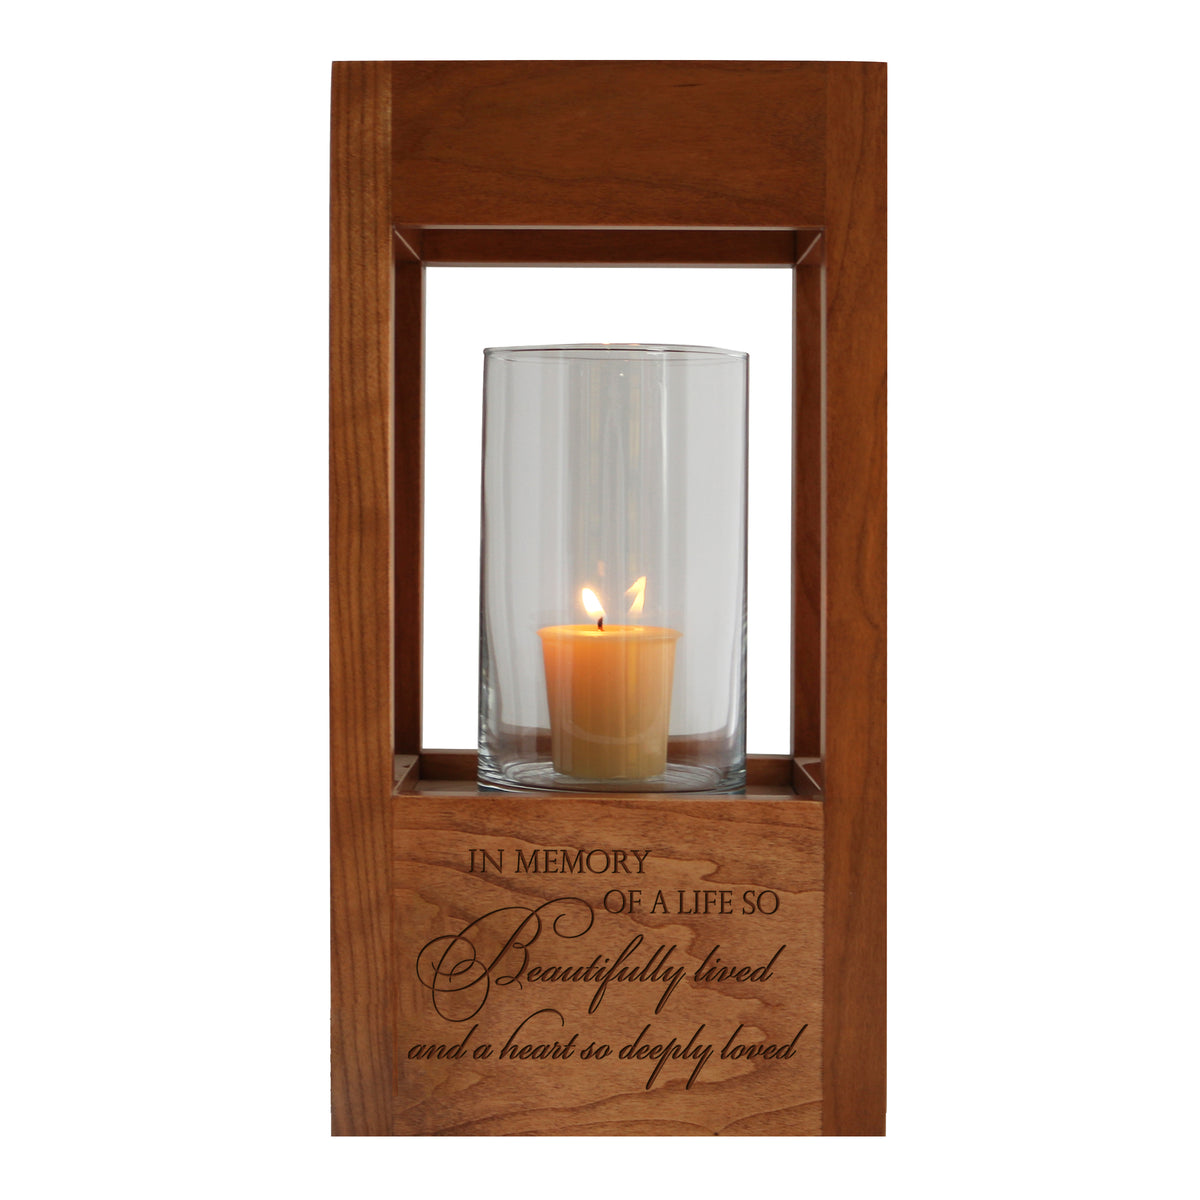 Lifesong Milestones Personalized Funeral Keepsake Cremation Urn For Human Ashes Memorial Lantern - Sympathy Solid Cherry Wooden Candle Holder - 6.5” x 6.5” x 13”